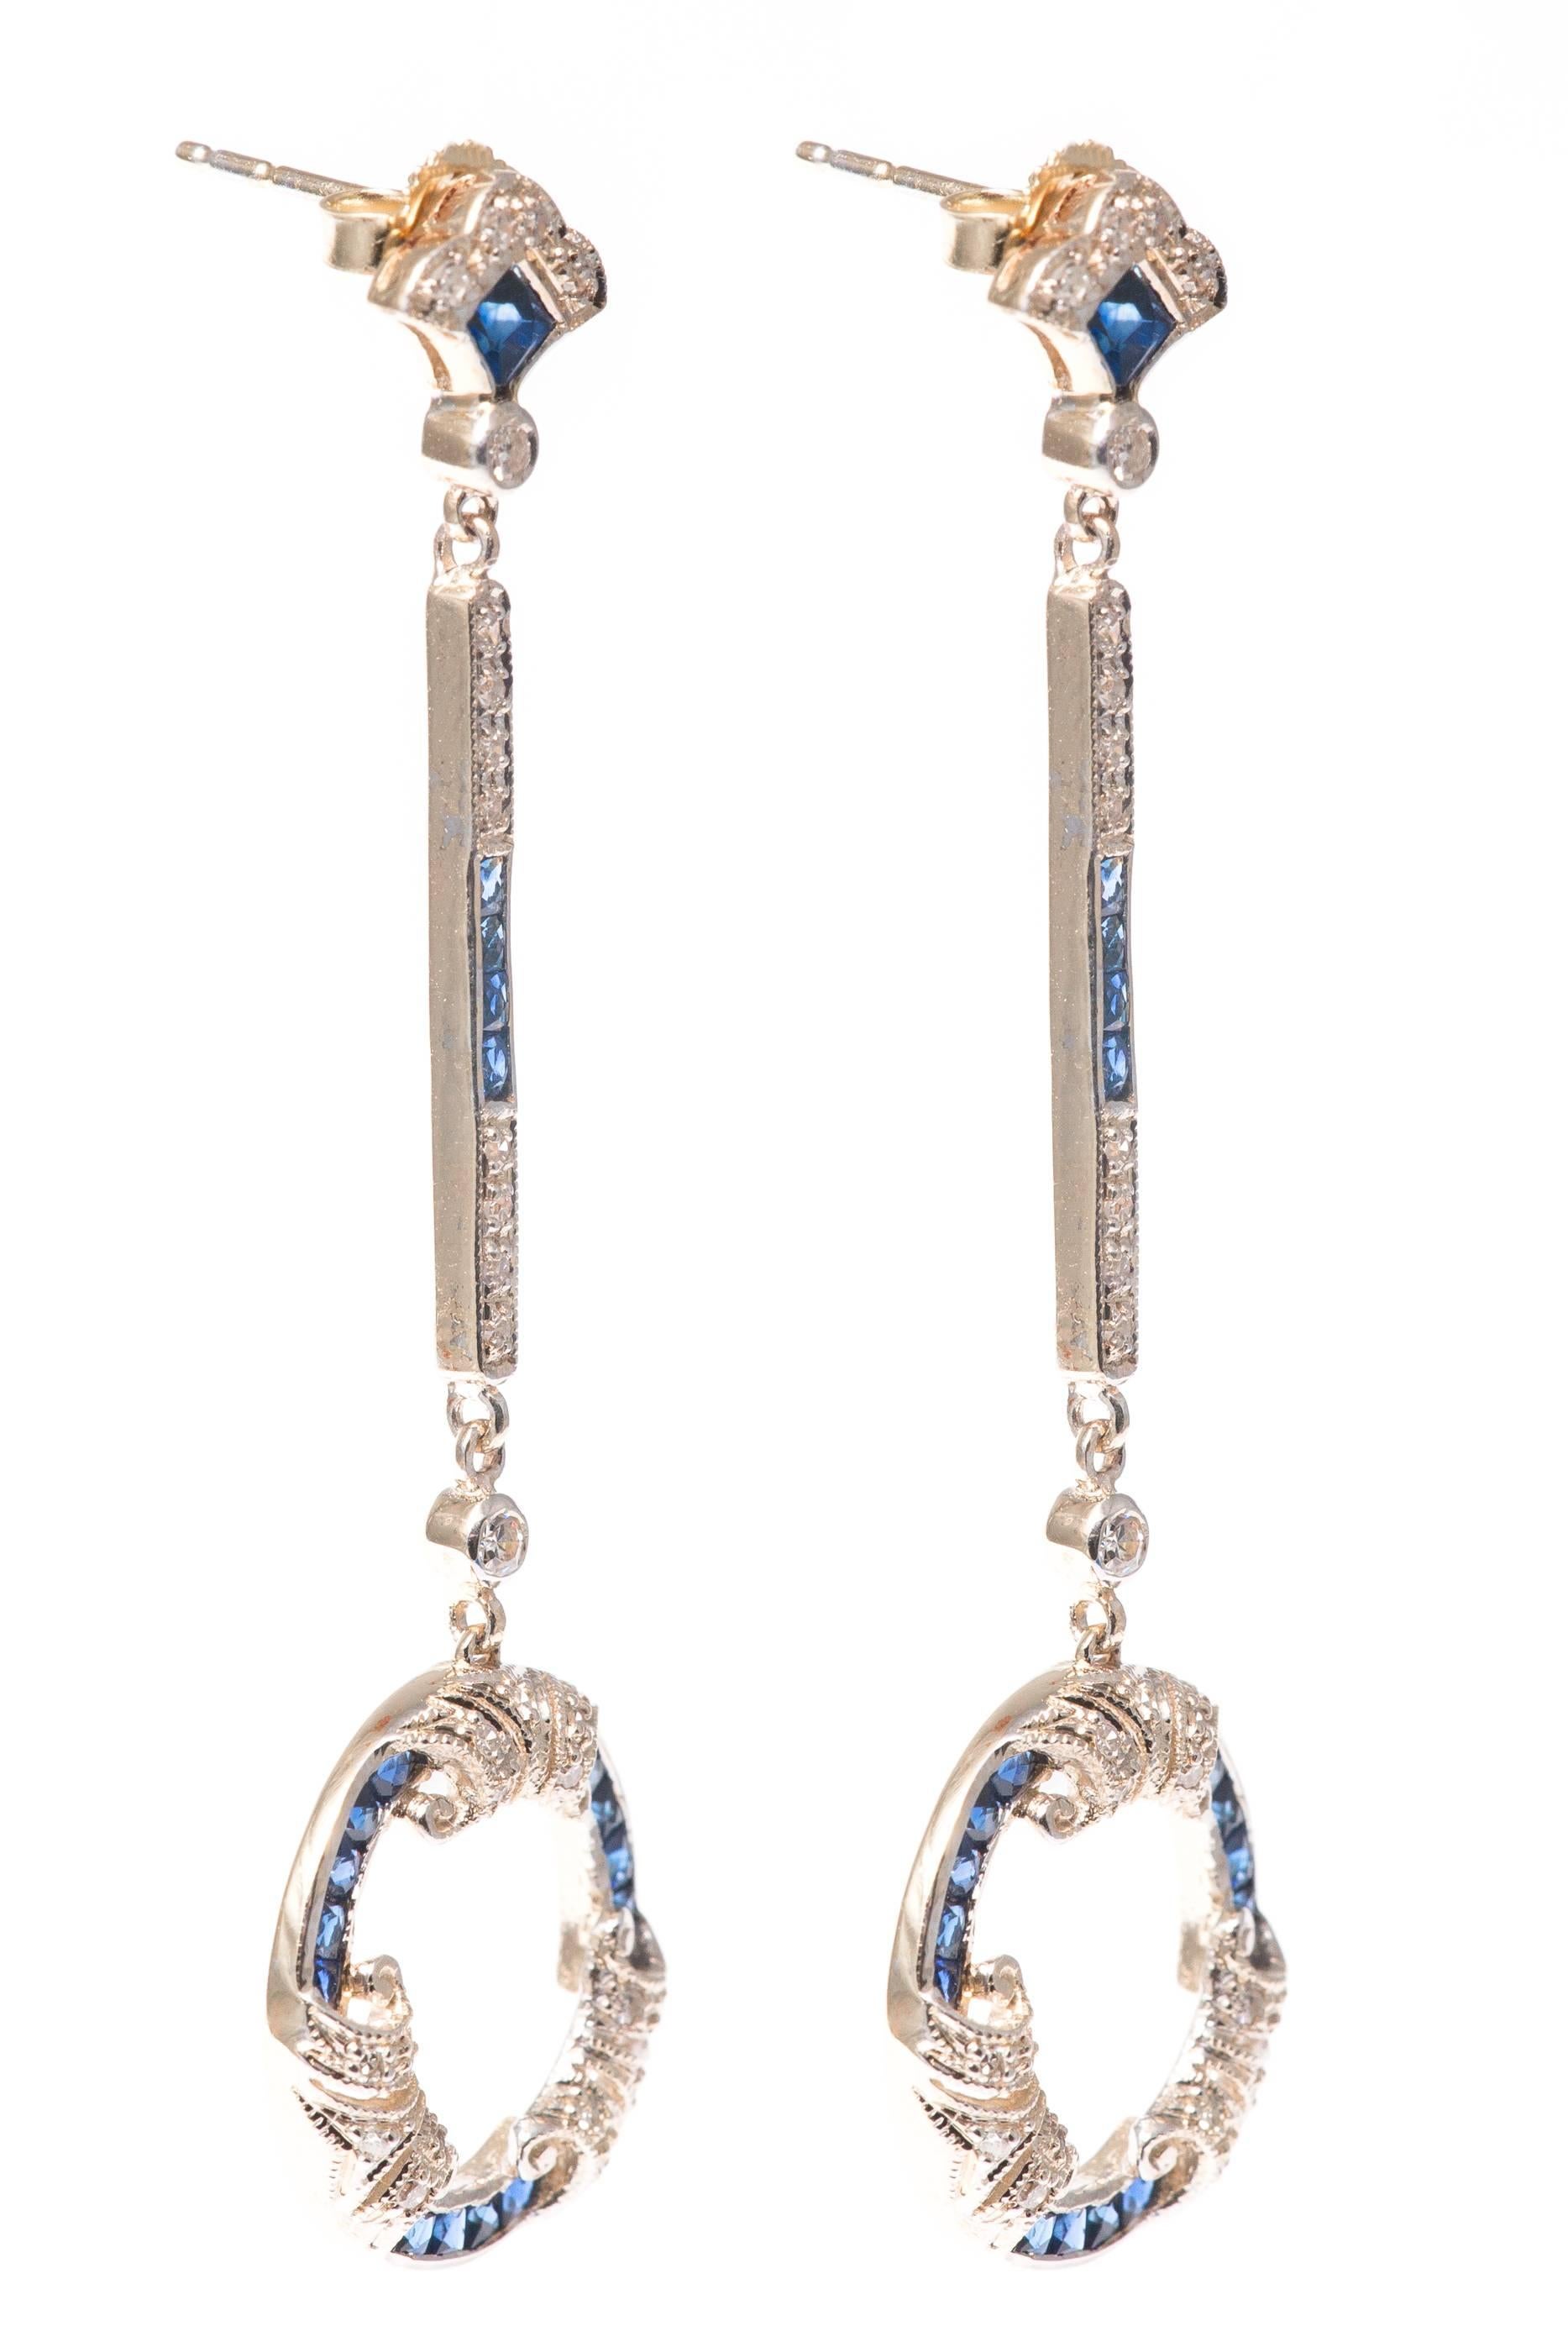 Beacon Hill Jewelers Presents:

A beautiful pair of platinum topped french cut sapphire and diamond earrings in yellow gold.  Set with beautiful rich vivid blue French cut sapphires these earrings also feature numerous pave and bezel set antique